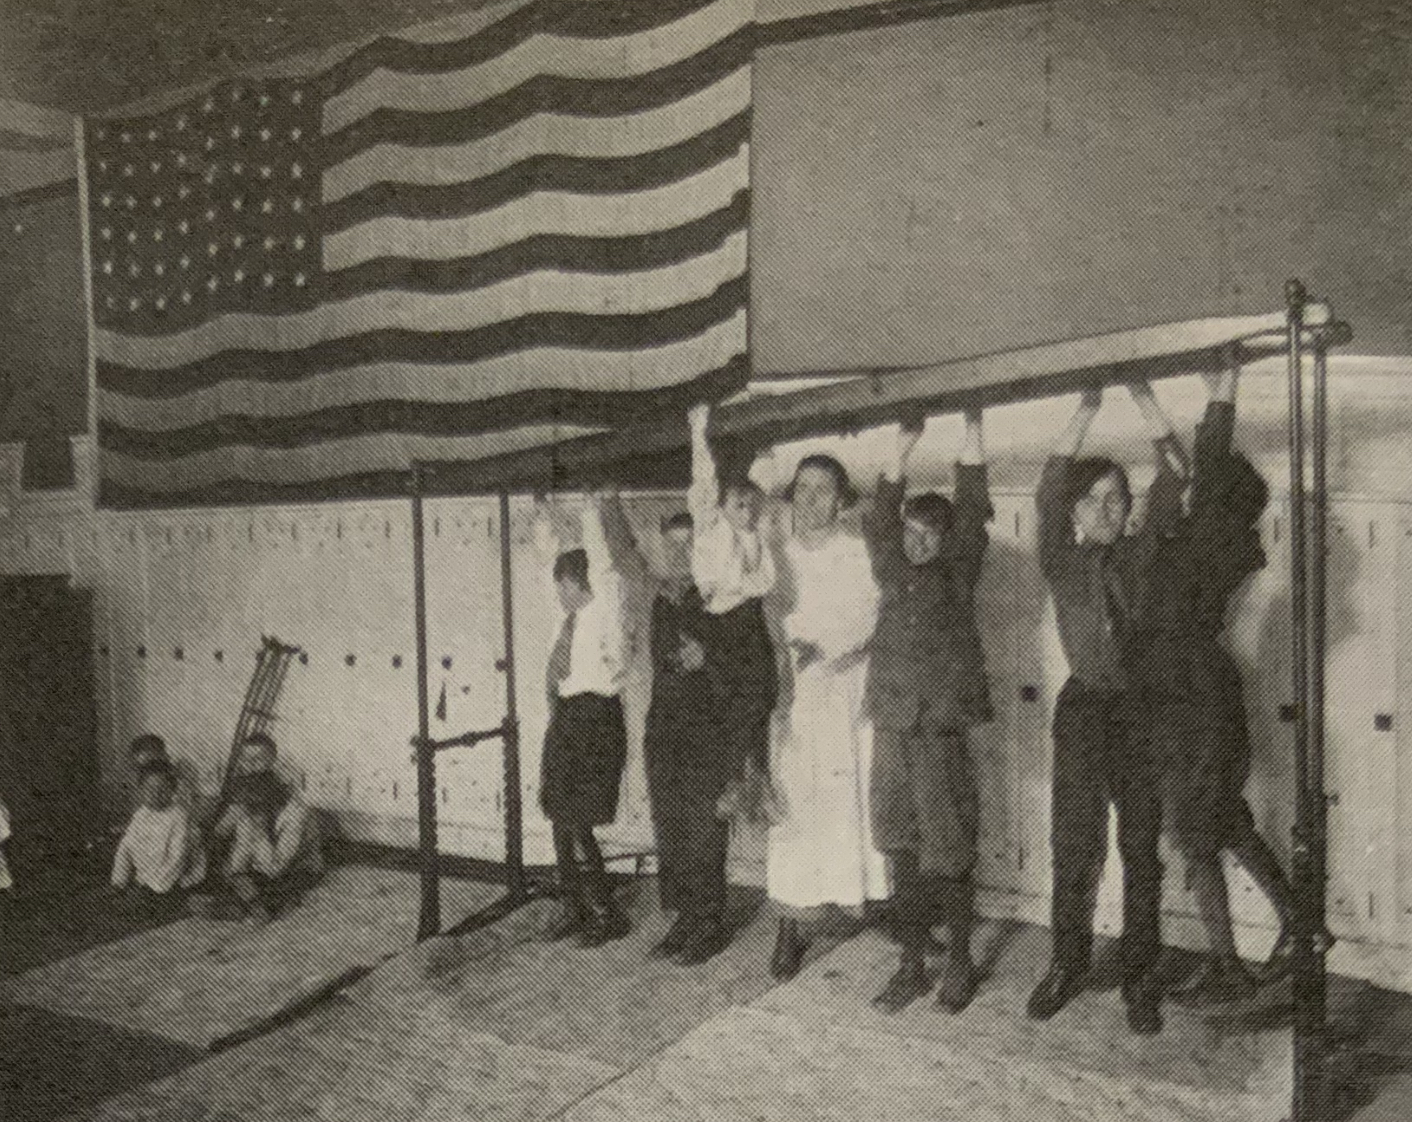 students hand from a gymnatsics bar during Physical therapy in the gym. there is a a large american flag on the wall behind them